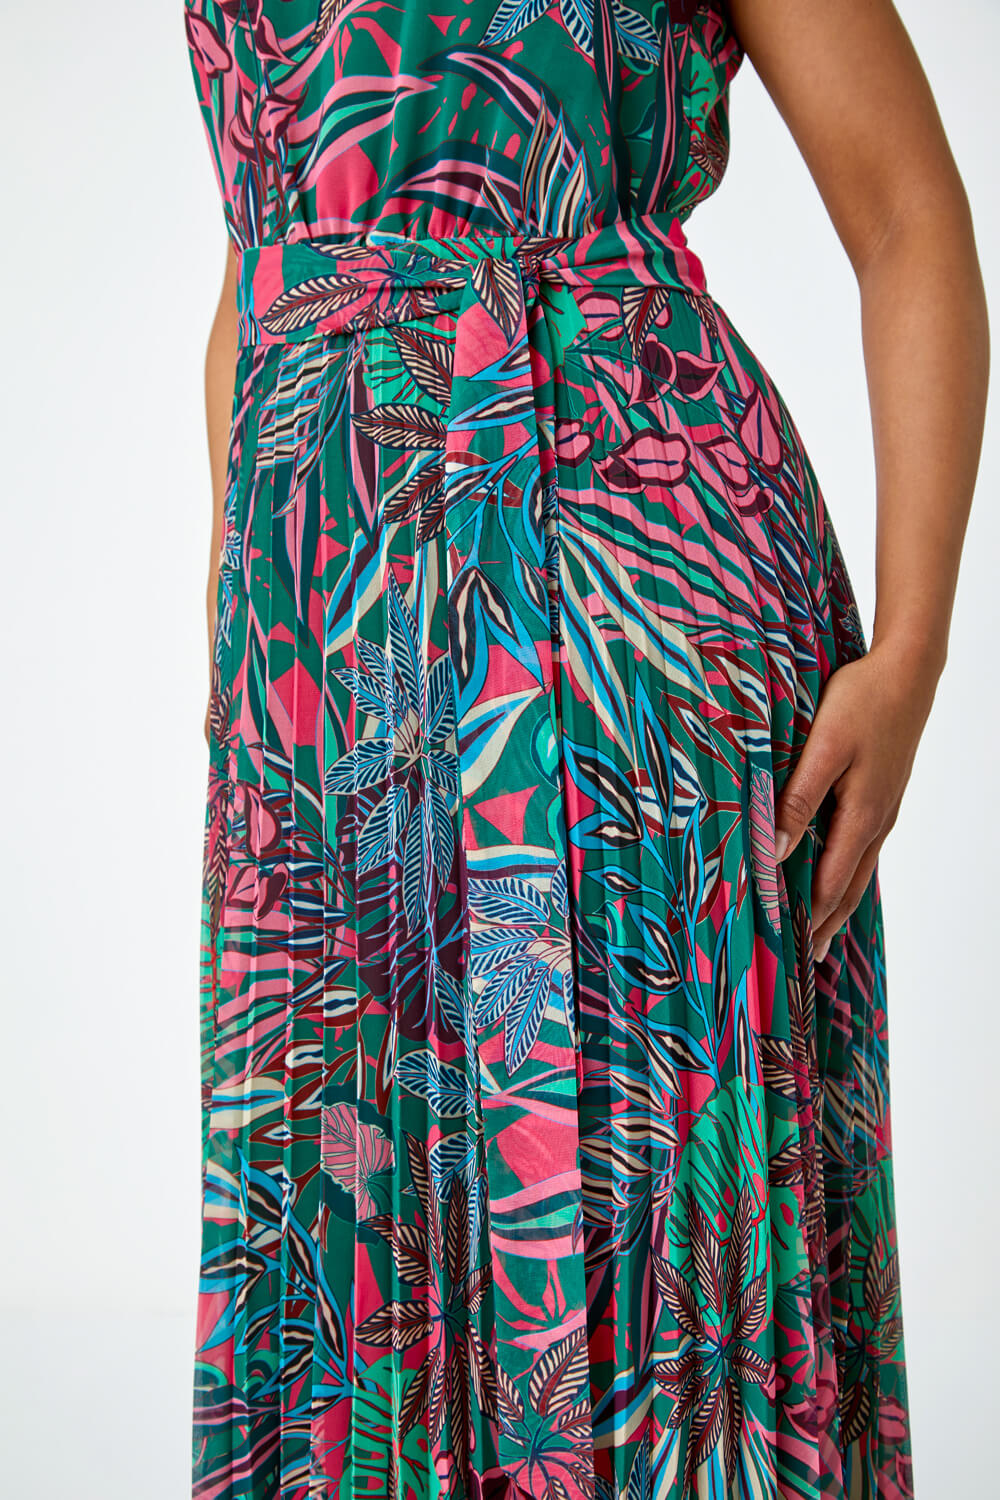 Green Petite Floral Pleated Maxi Dress, Image 5 of 5